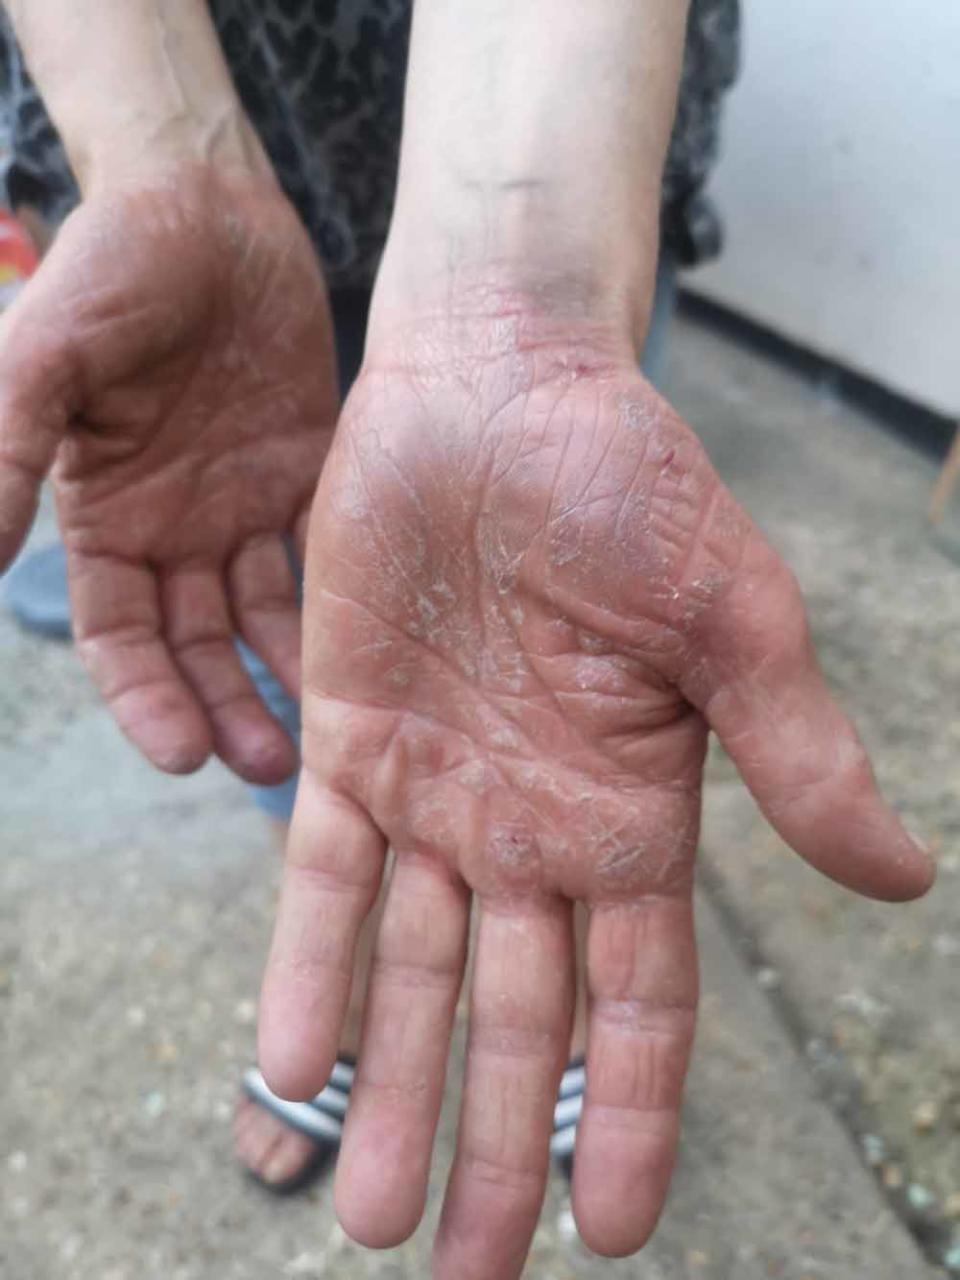 Maria’s hands became itchy and sore during the first lockdown in March 2020. (Collect/PA Real Life)